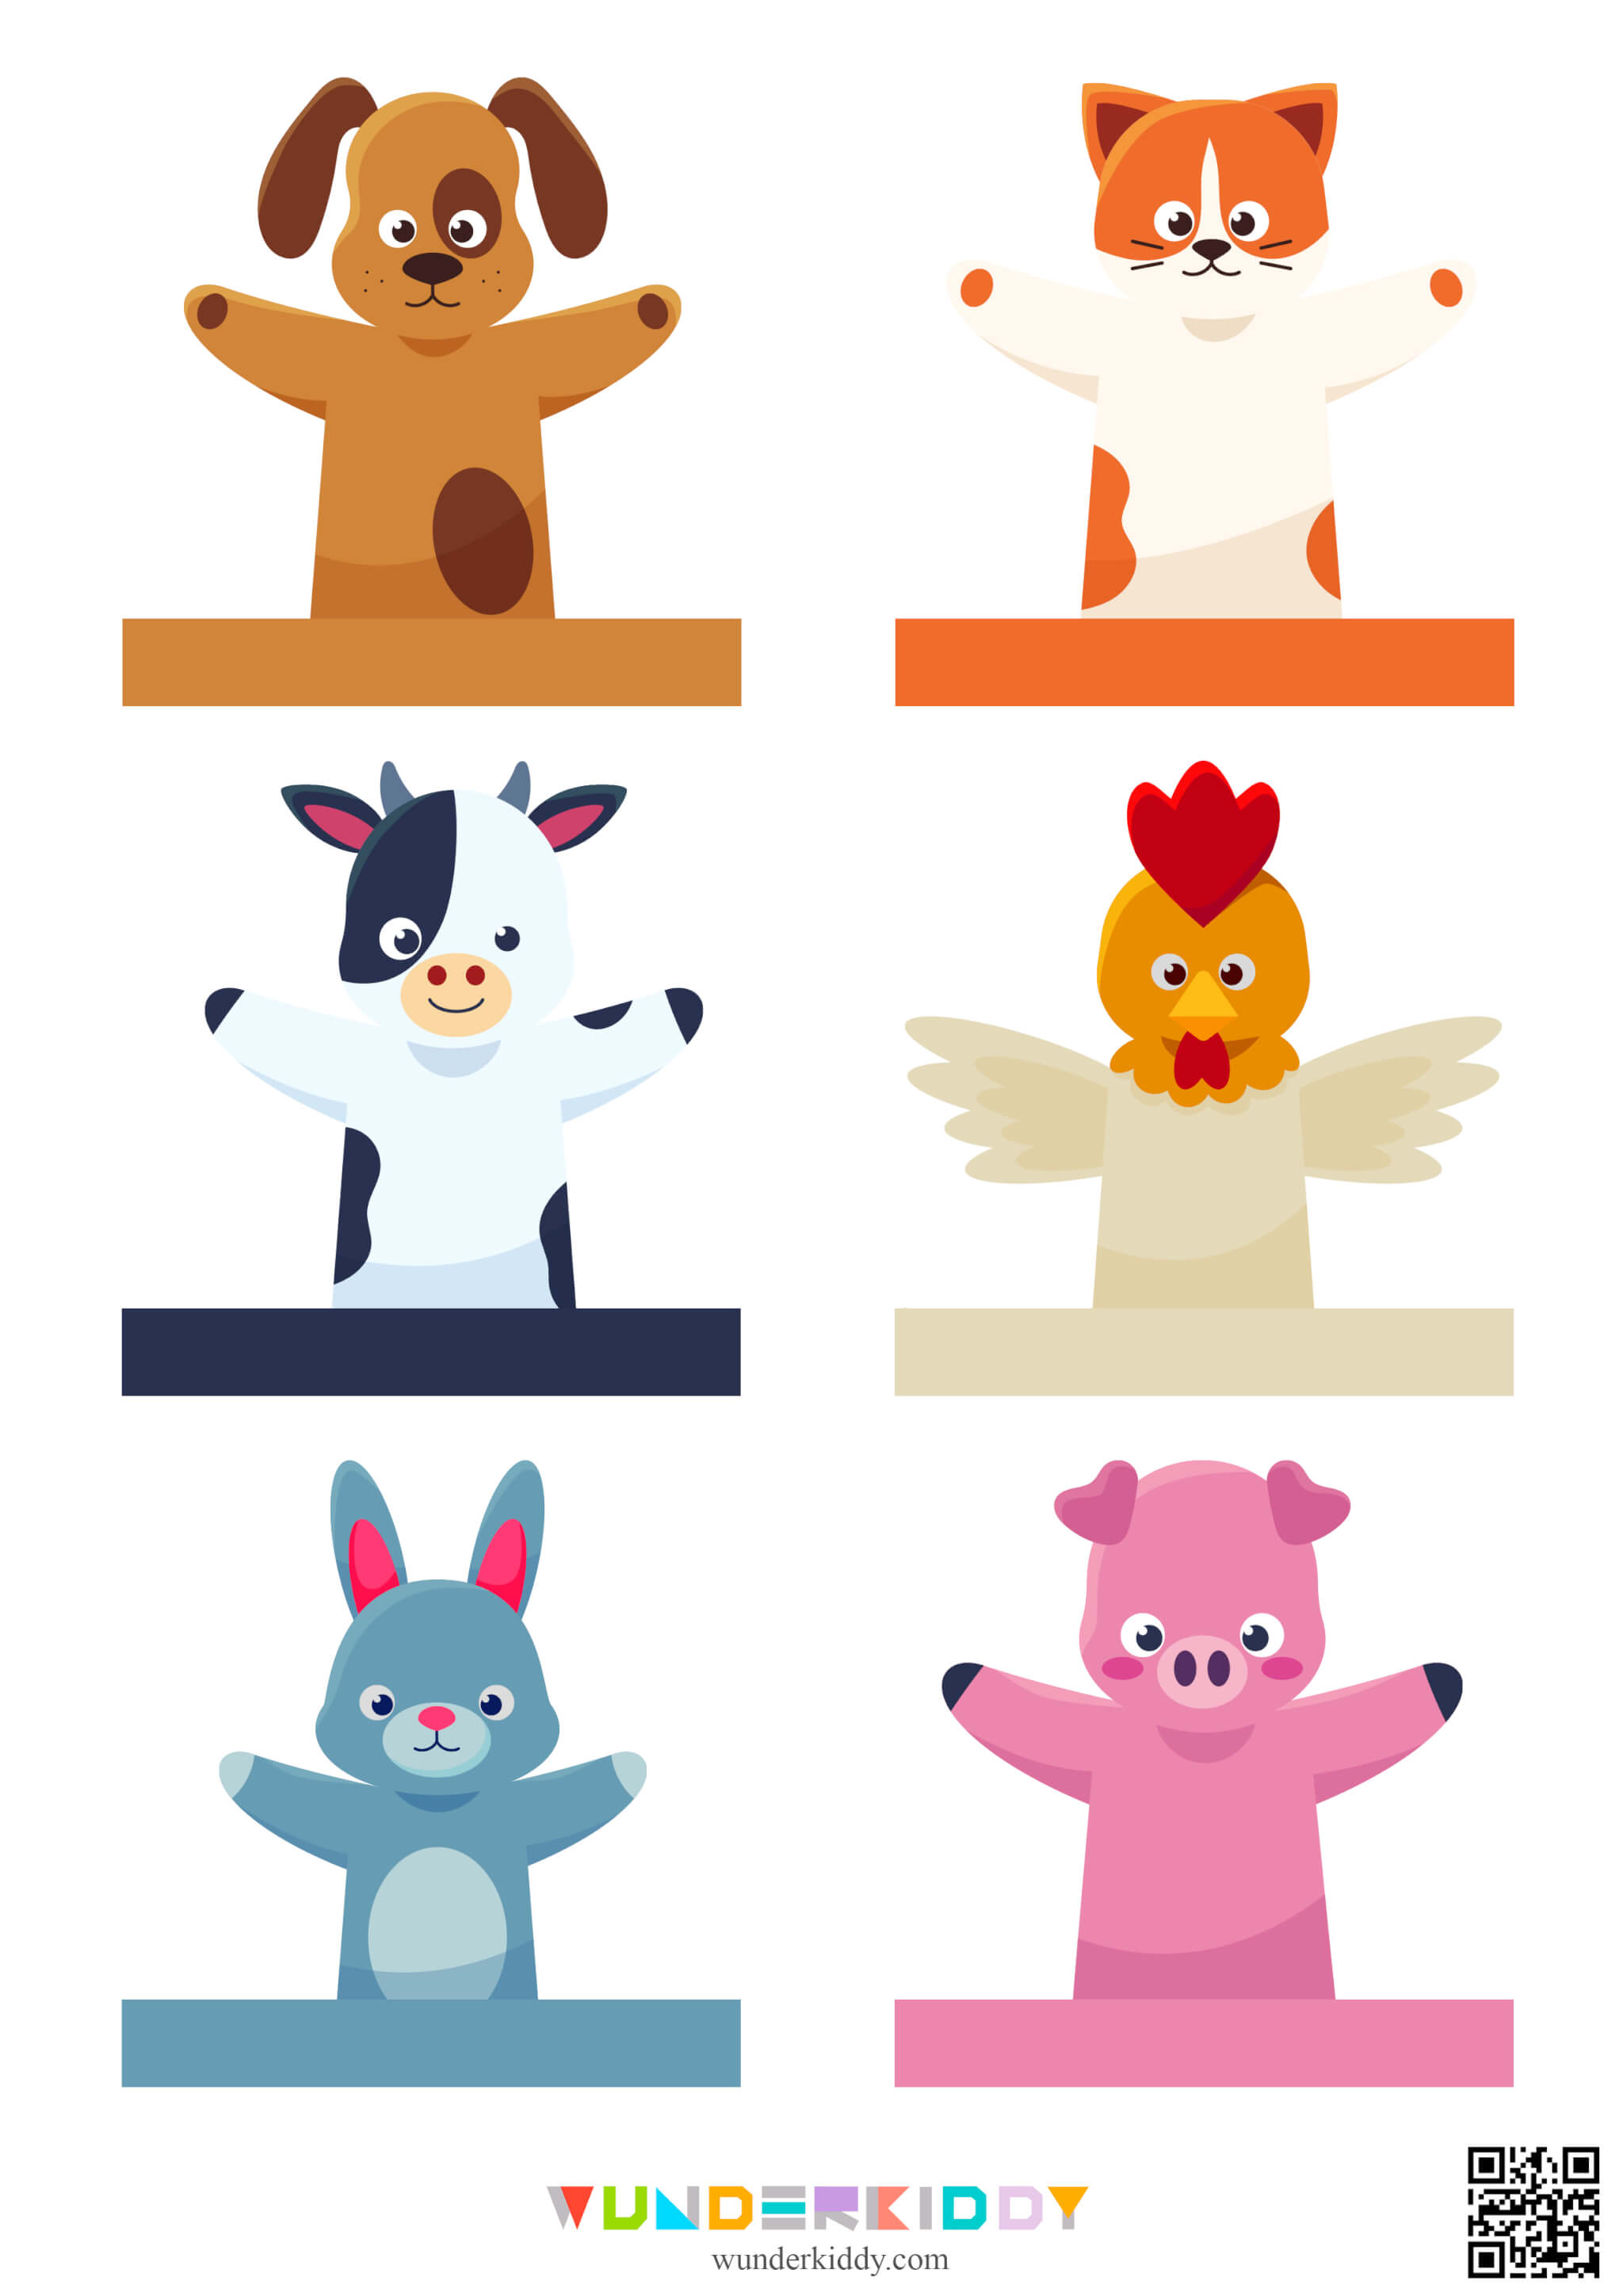 Template «Finger Puppets» - Image 4